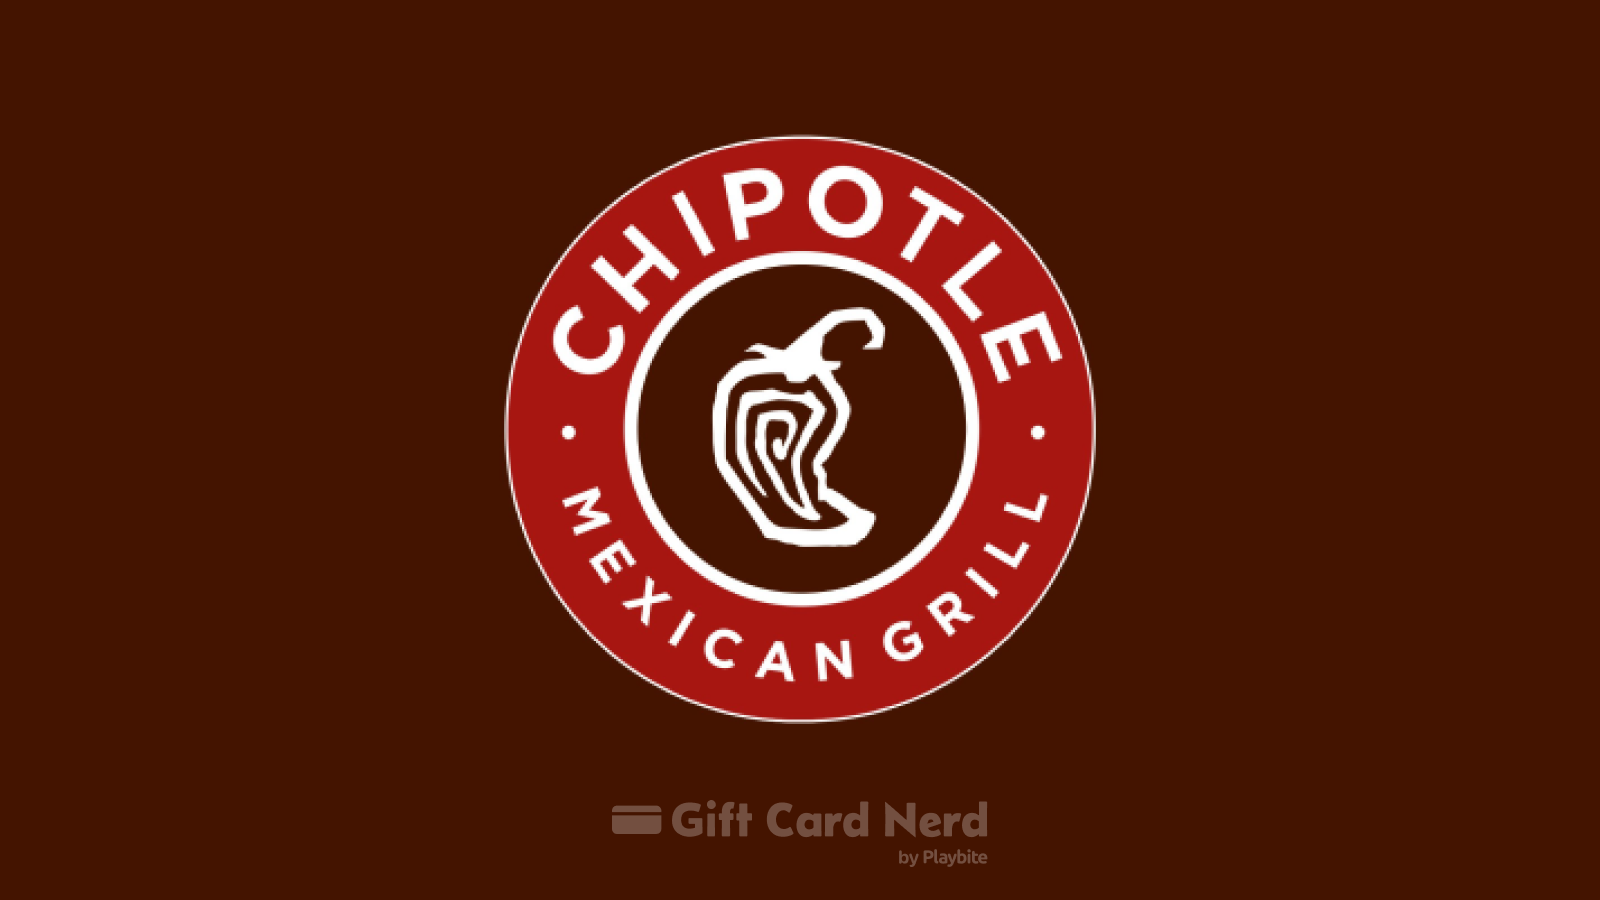 Does Target Sell Chipotle Gift Cards?